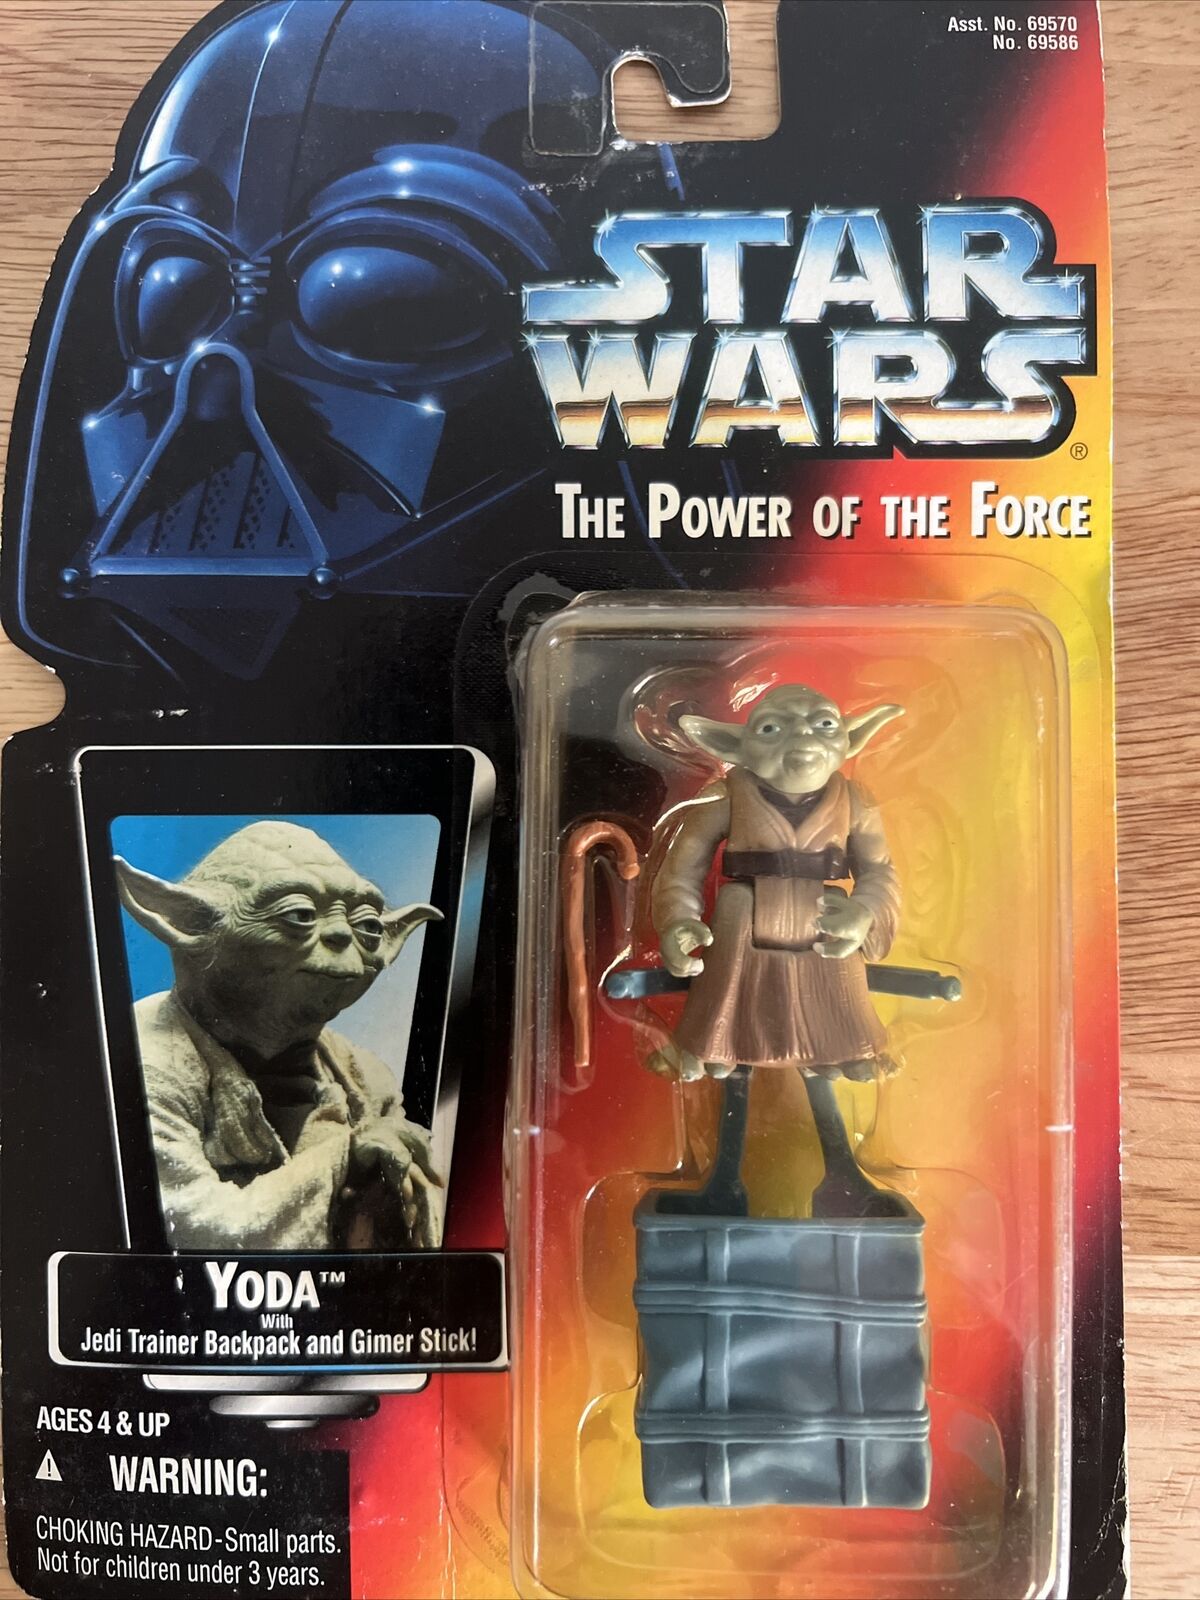 Star Wars Power of the Force Yoda Action Figure w/ Accessories NIB (1995)